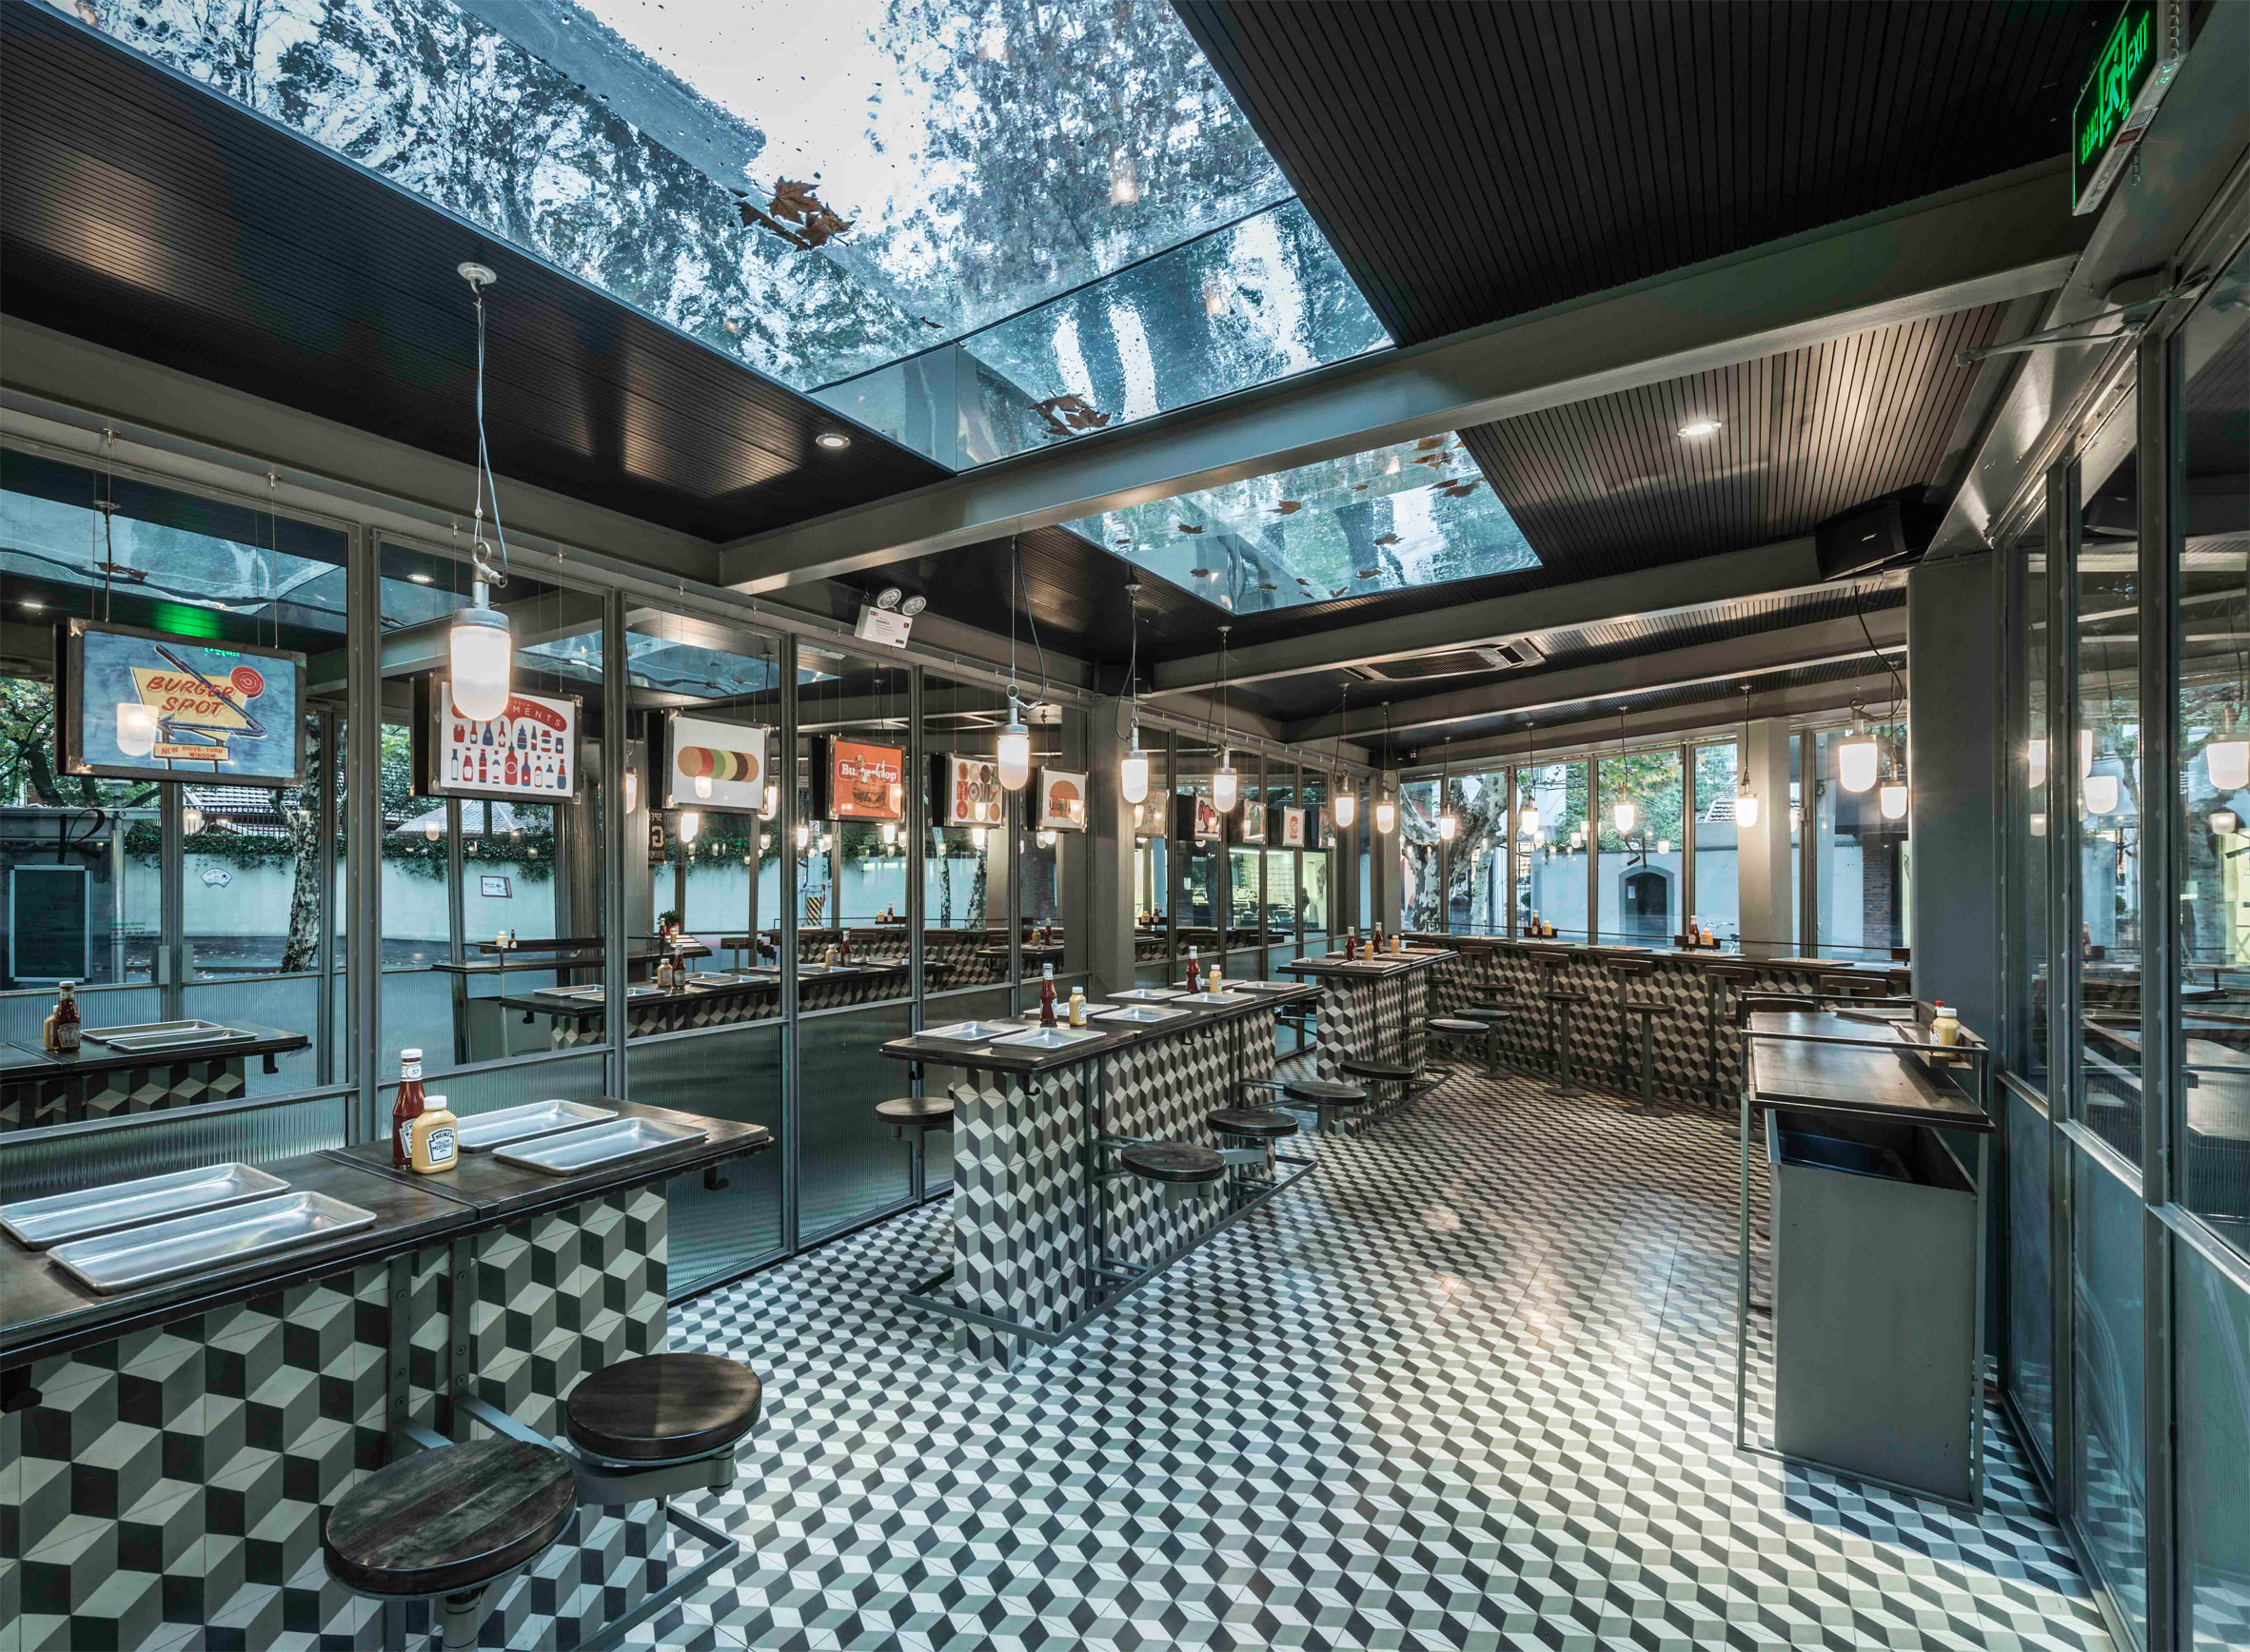 bars-and-restaurant-inside-rachels-burger-shanghai-china-neri-and-hu-design-and-research-office_dezeen_2364_col_0